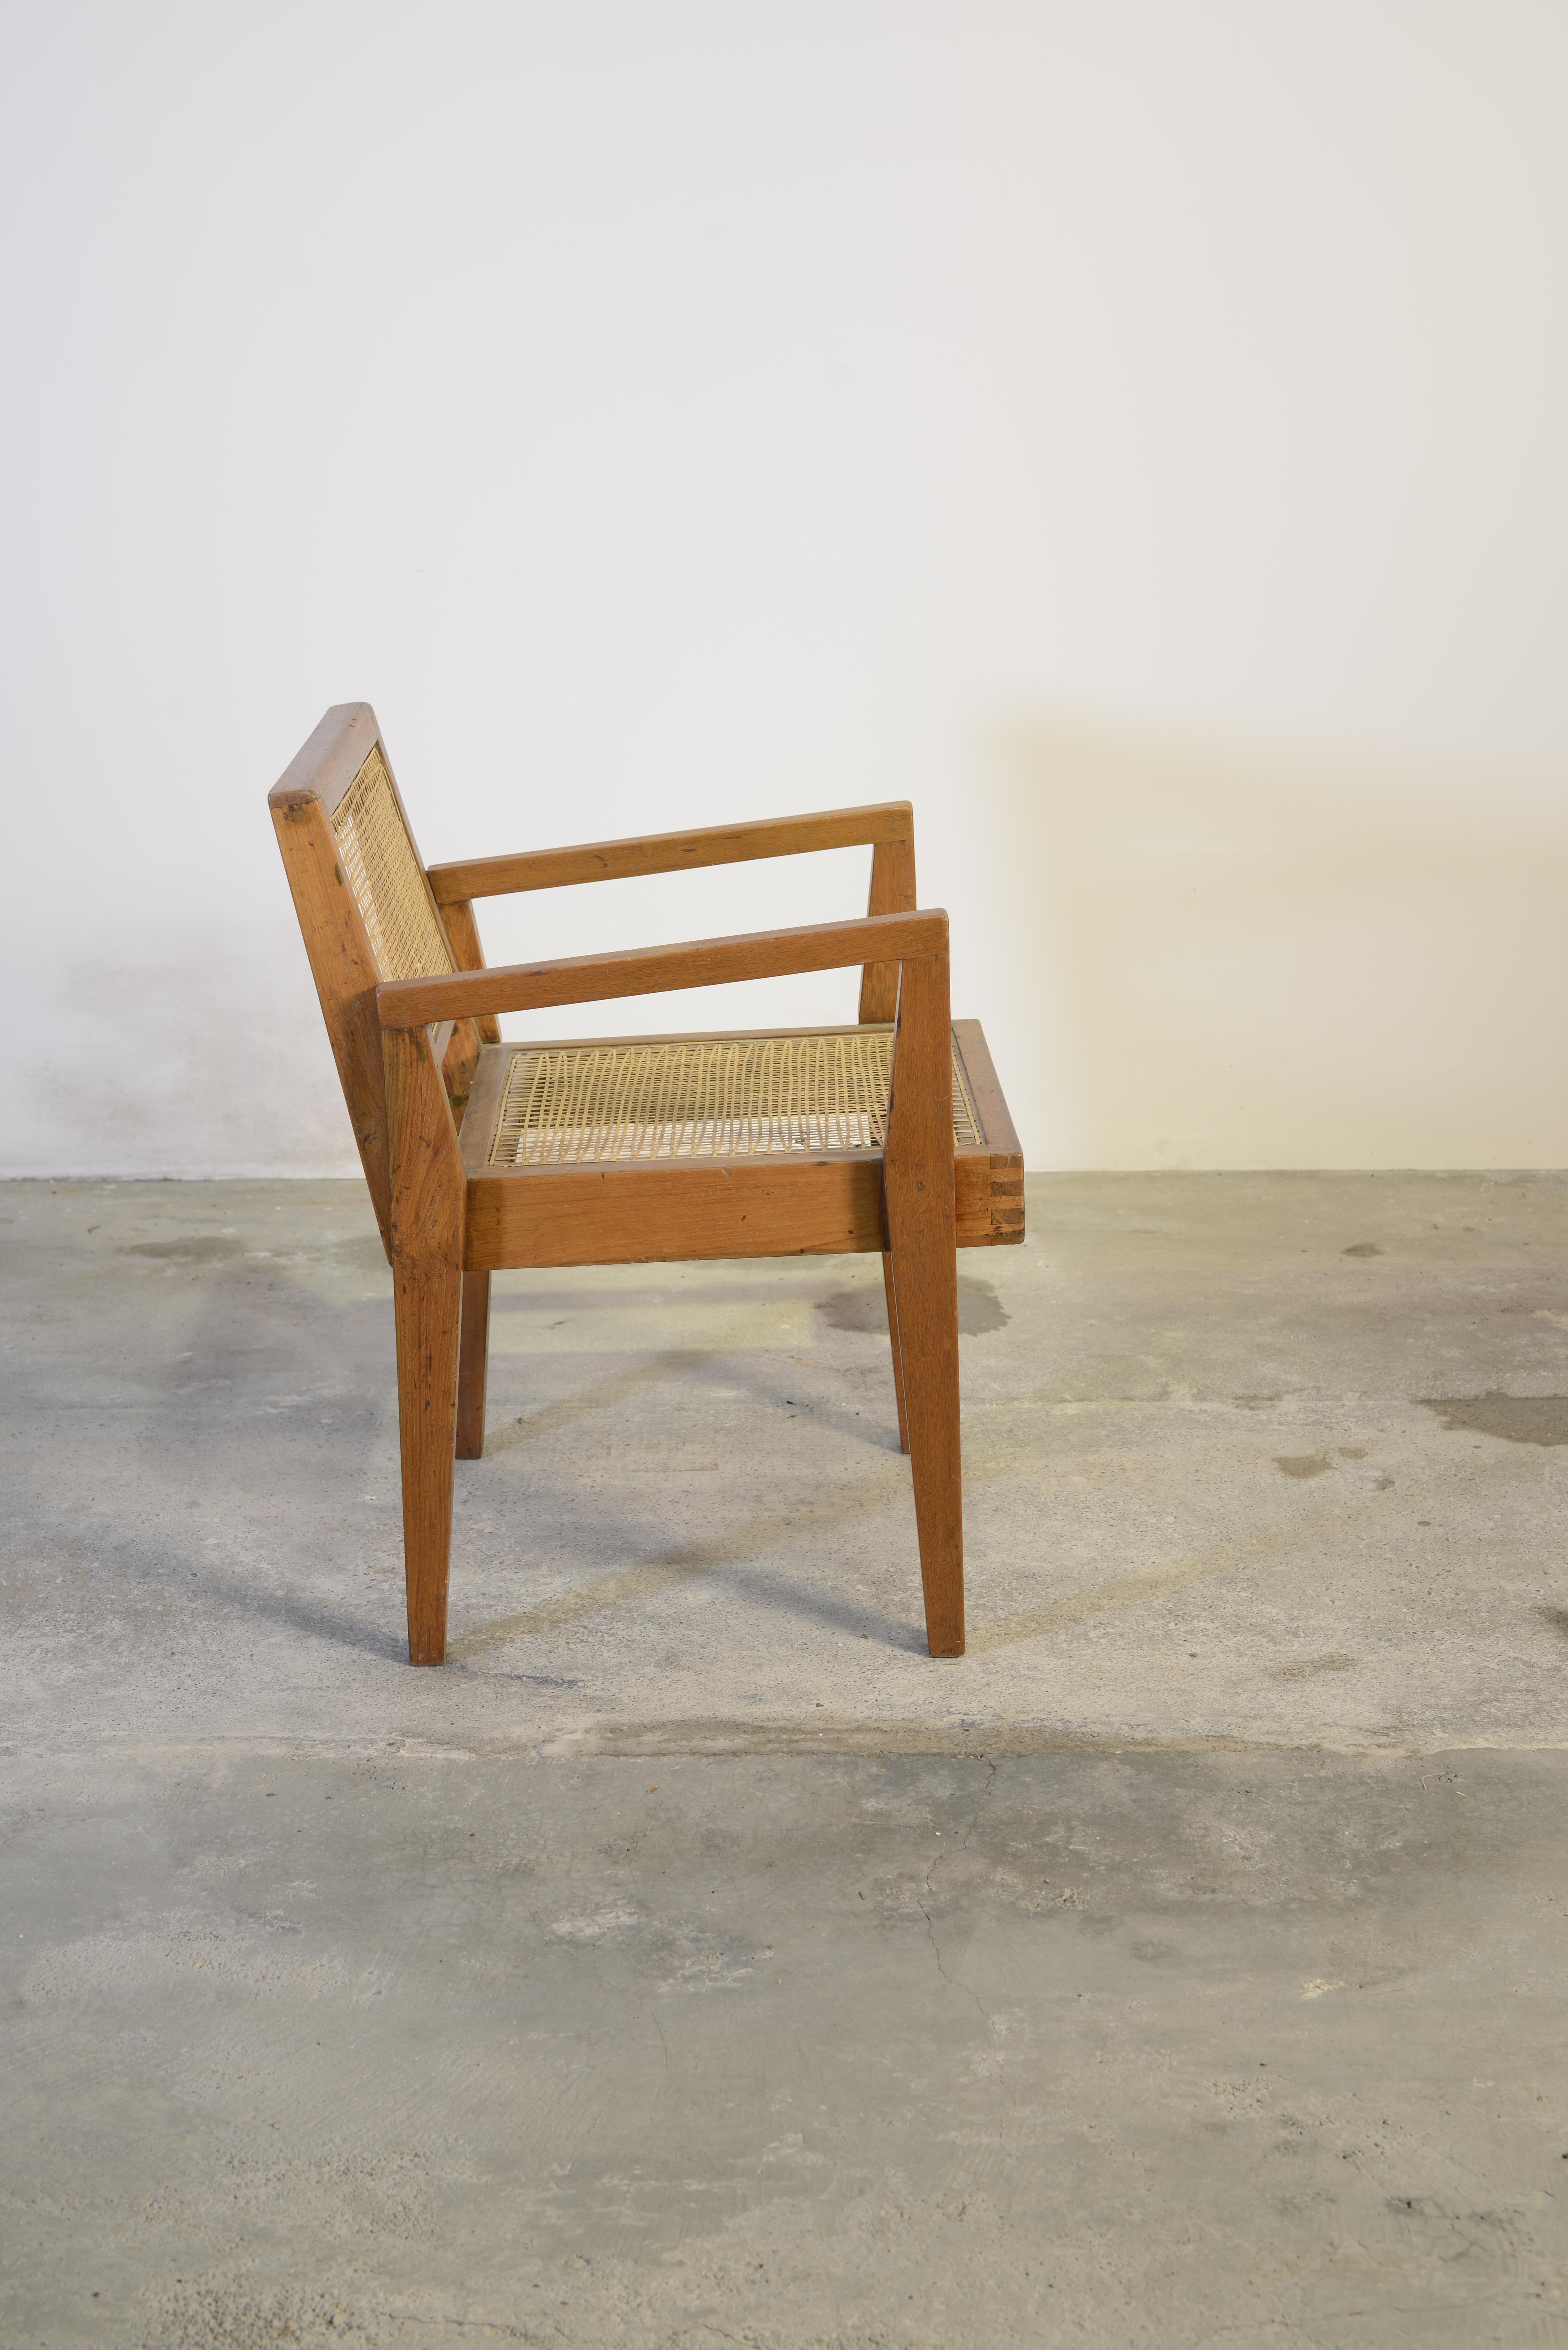 Mid-20th Century Pierre Jeanneret PJ-SI-20-A Chairs 1955-1960 / Authentic Mid-Century Modern